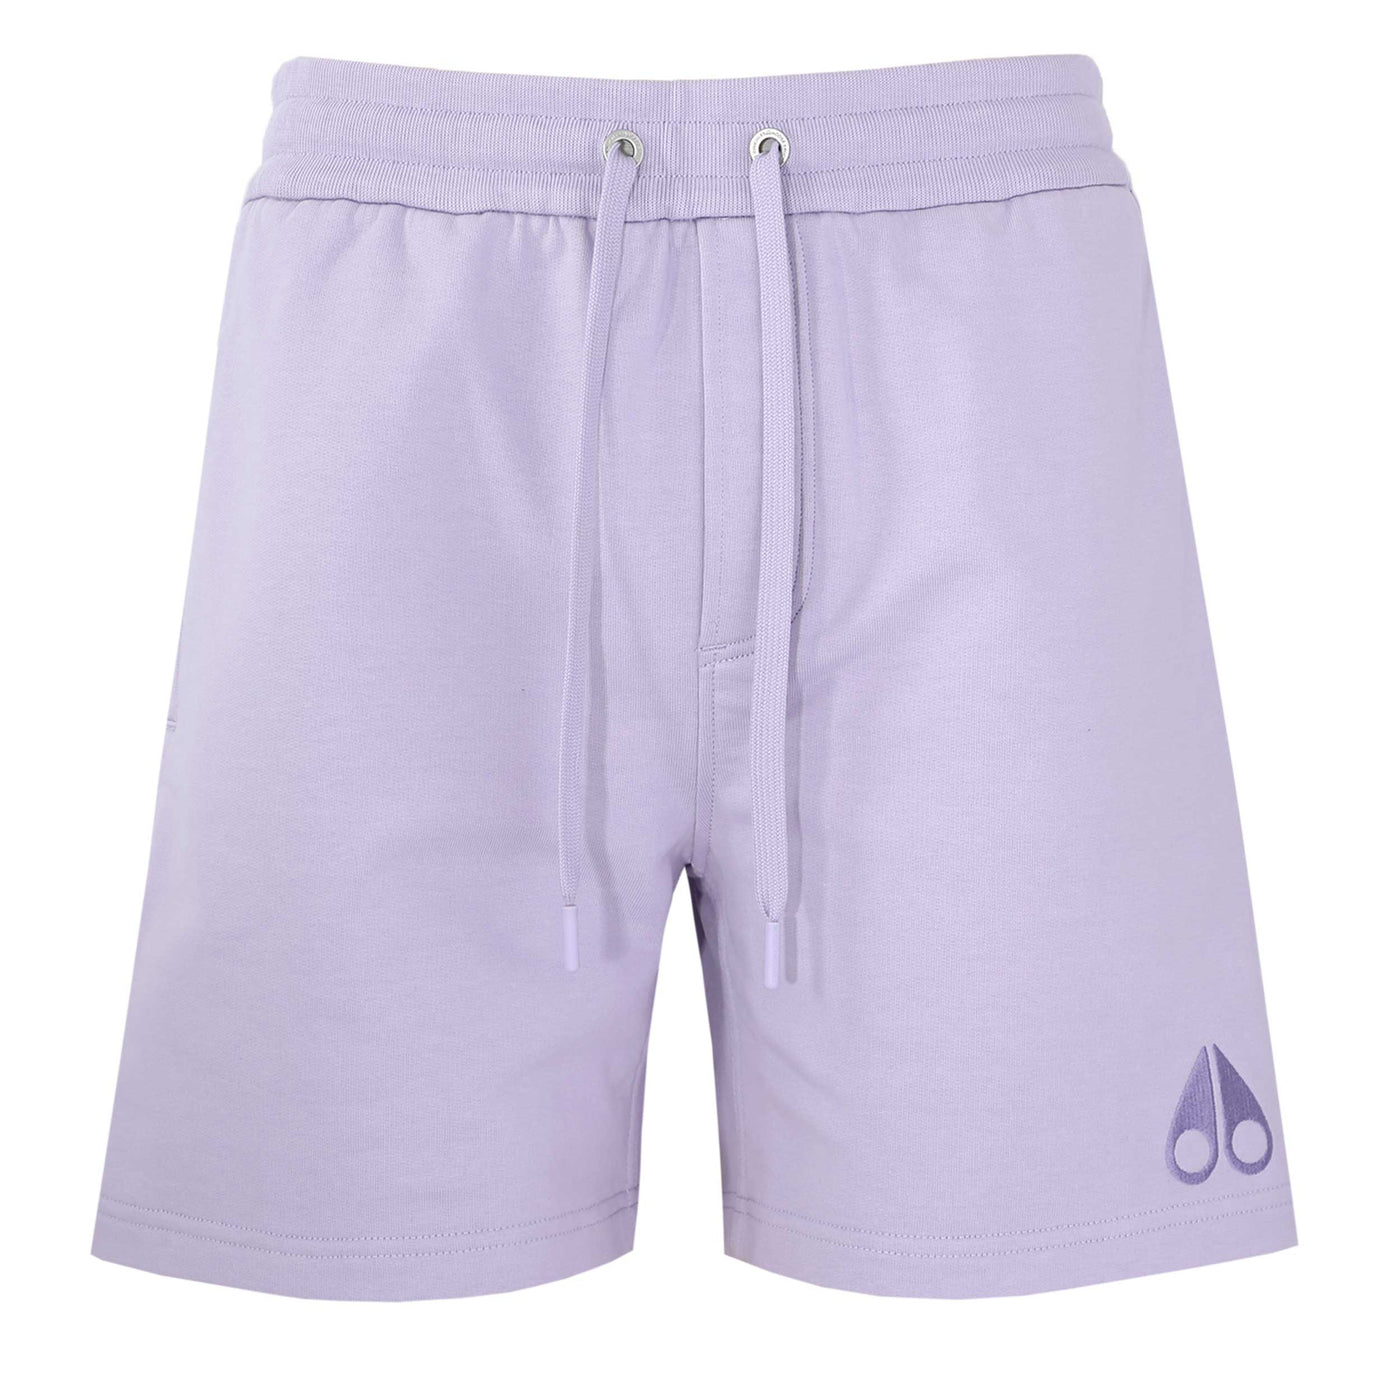 Moose Knuckles Clyde Shorts Sweat Short in Orchid Petal